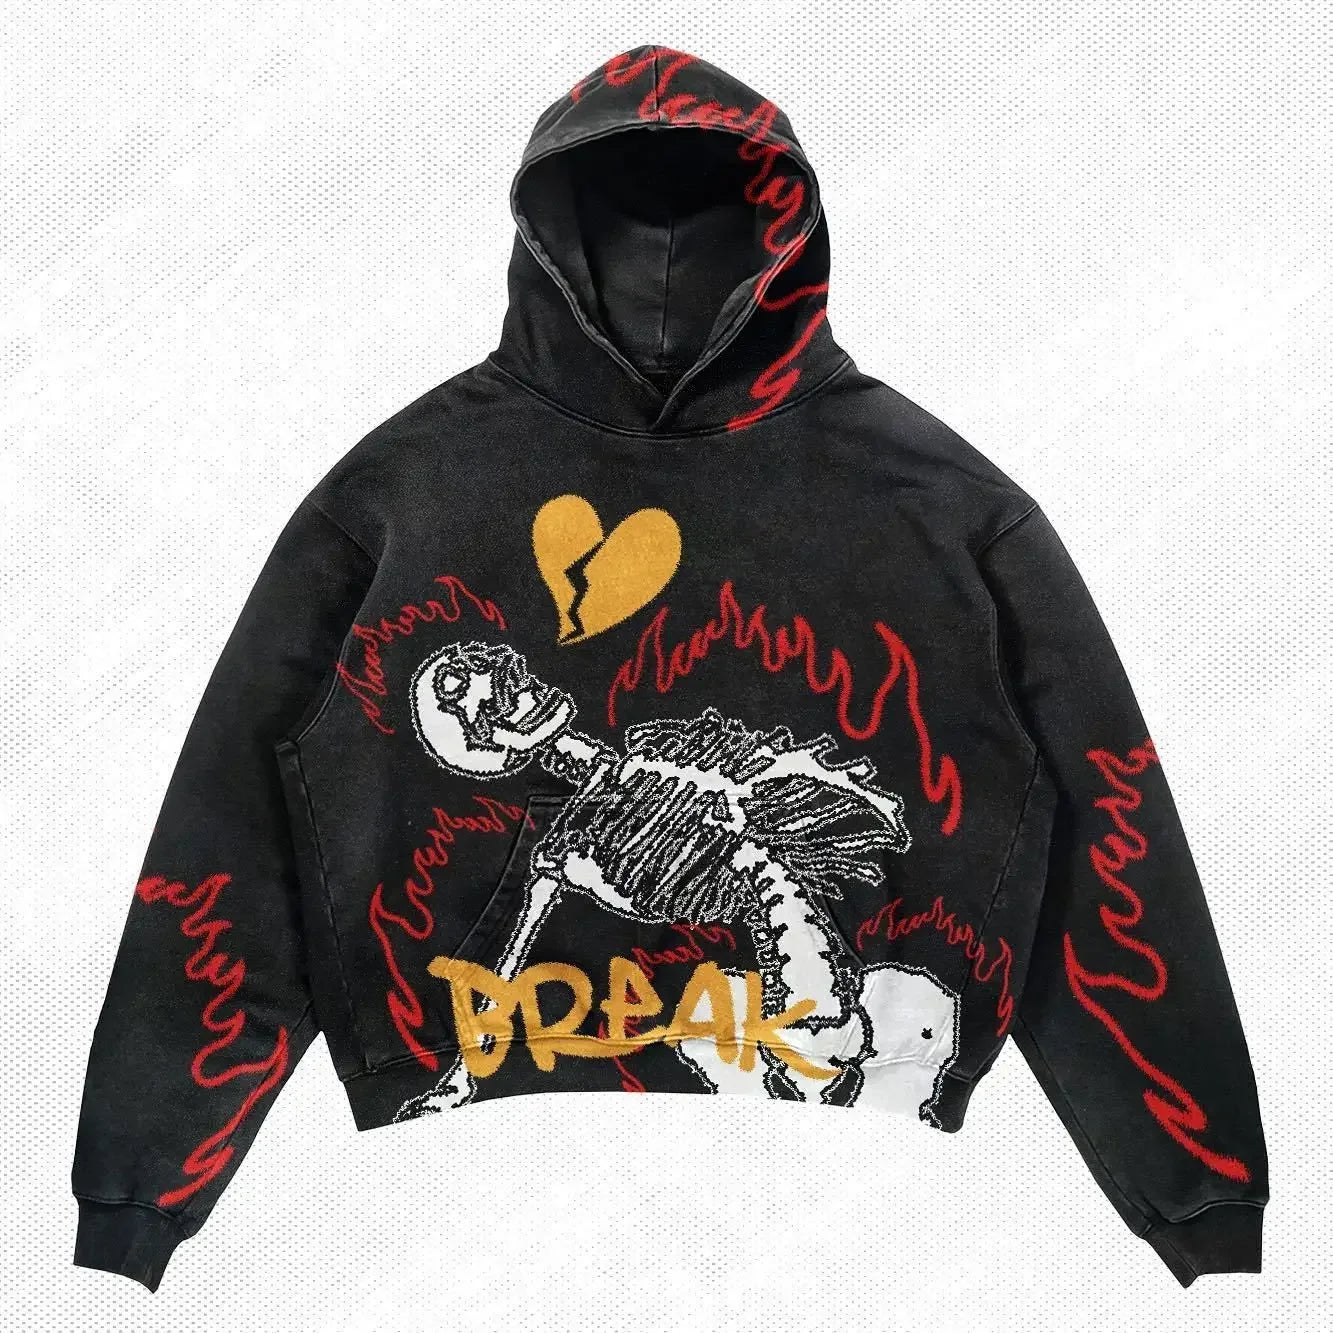 A black punk style hoodie with a skeleton and red flames design. The word "BREAK" and a broken heart symbol are printed on the front, making it perfect for four seasons wear. Introducing Maramalive™ Explosions Printed Skull Y2K Retro Hooded Sweater Coat Street Style Gothic Casual Fashion Hooded Sweater Men's Female.